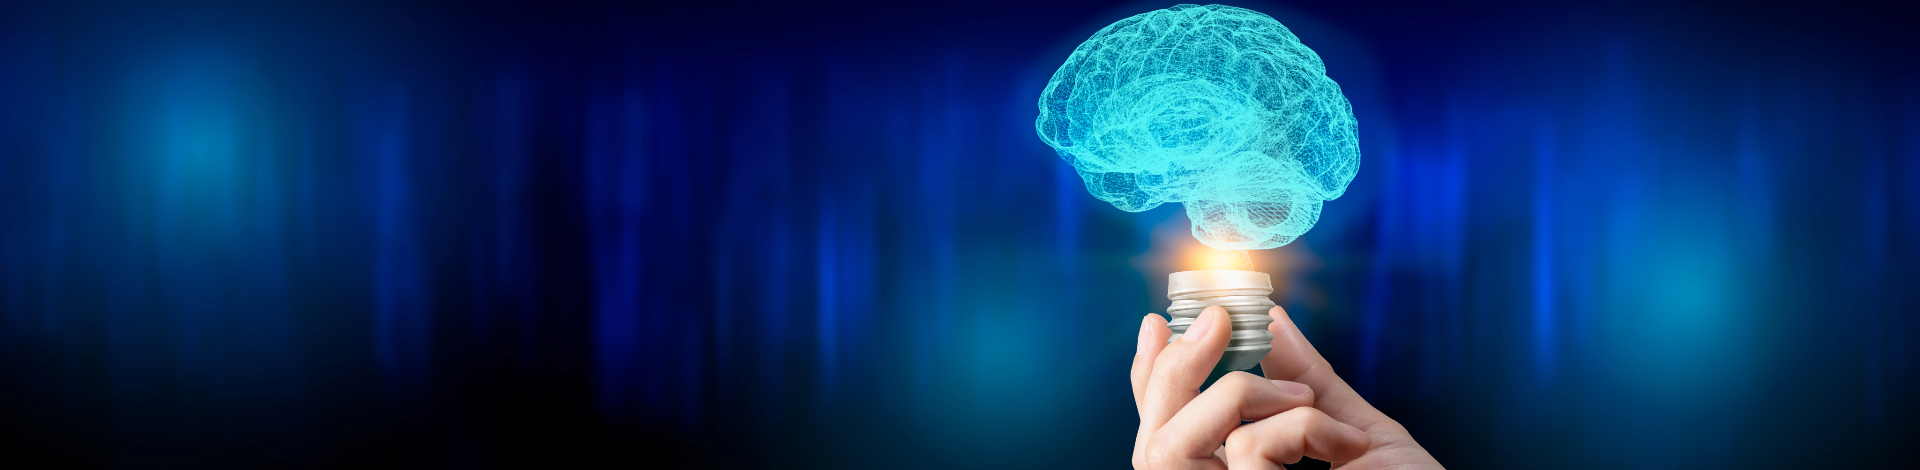 stock-photo-concept-of-creative-thinking-ideas-and-innovation-hand-holding-bulb-and-brain-growth-light-on